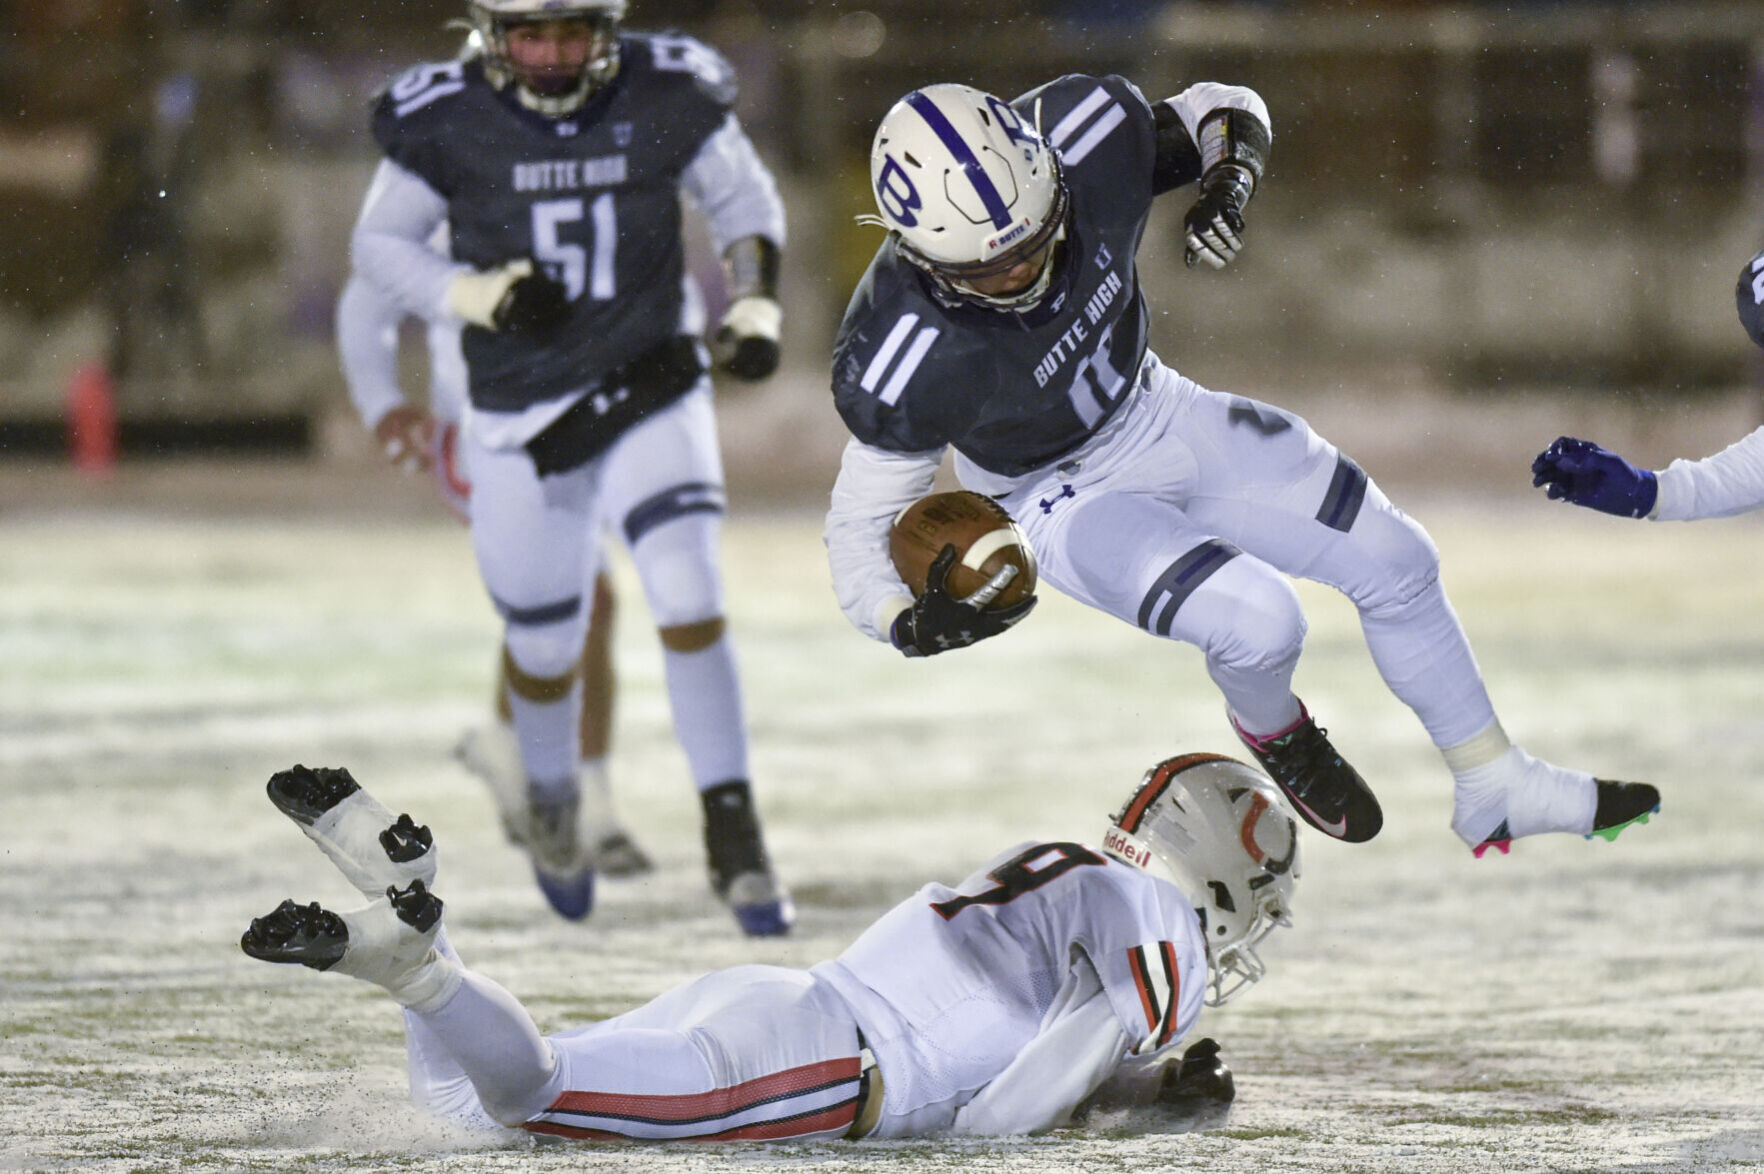 Butte Bulldogs ground-and-pound their way to victory over Billings Senior in snowy playoff conditions